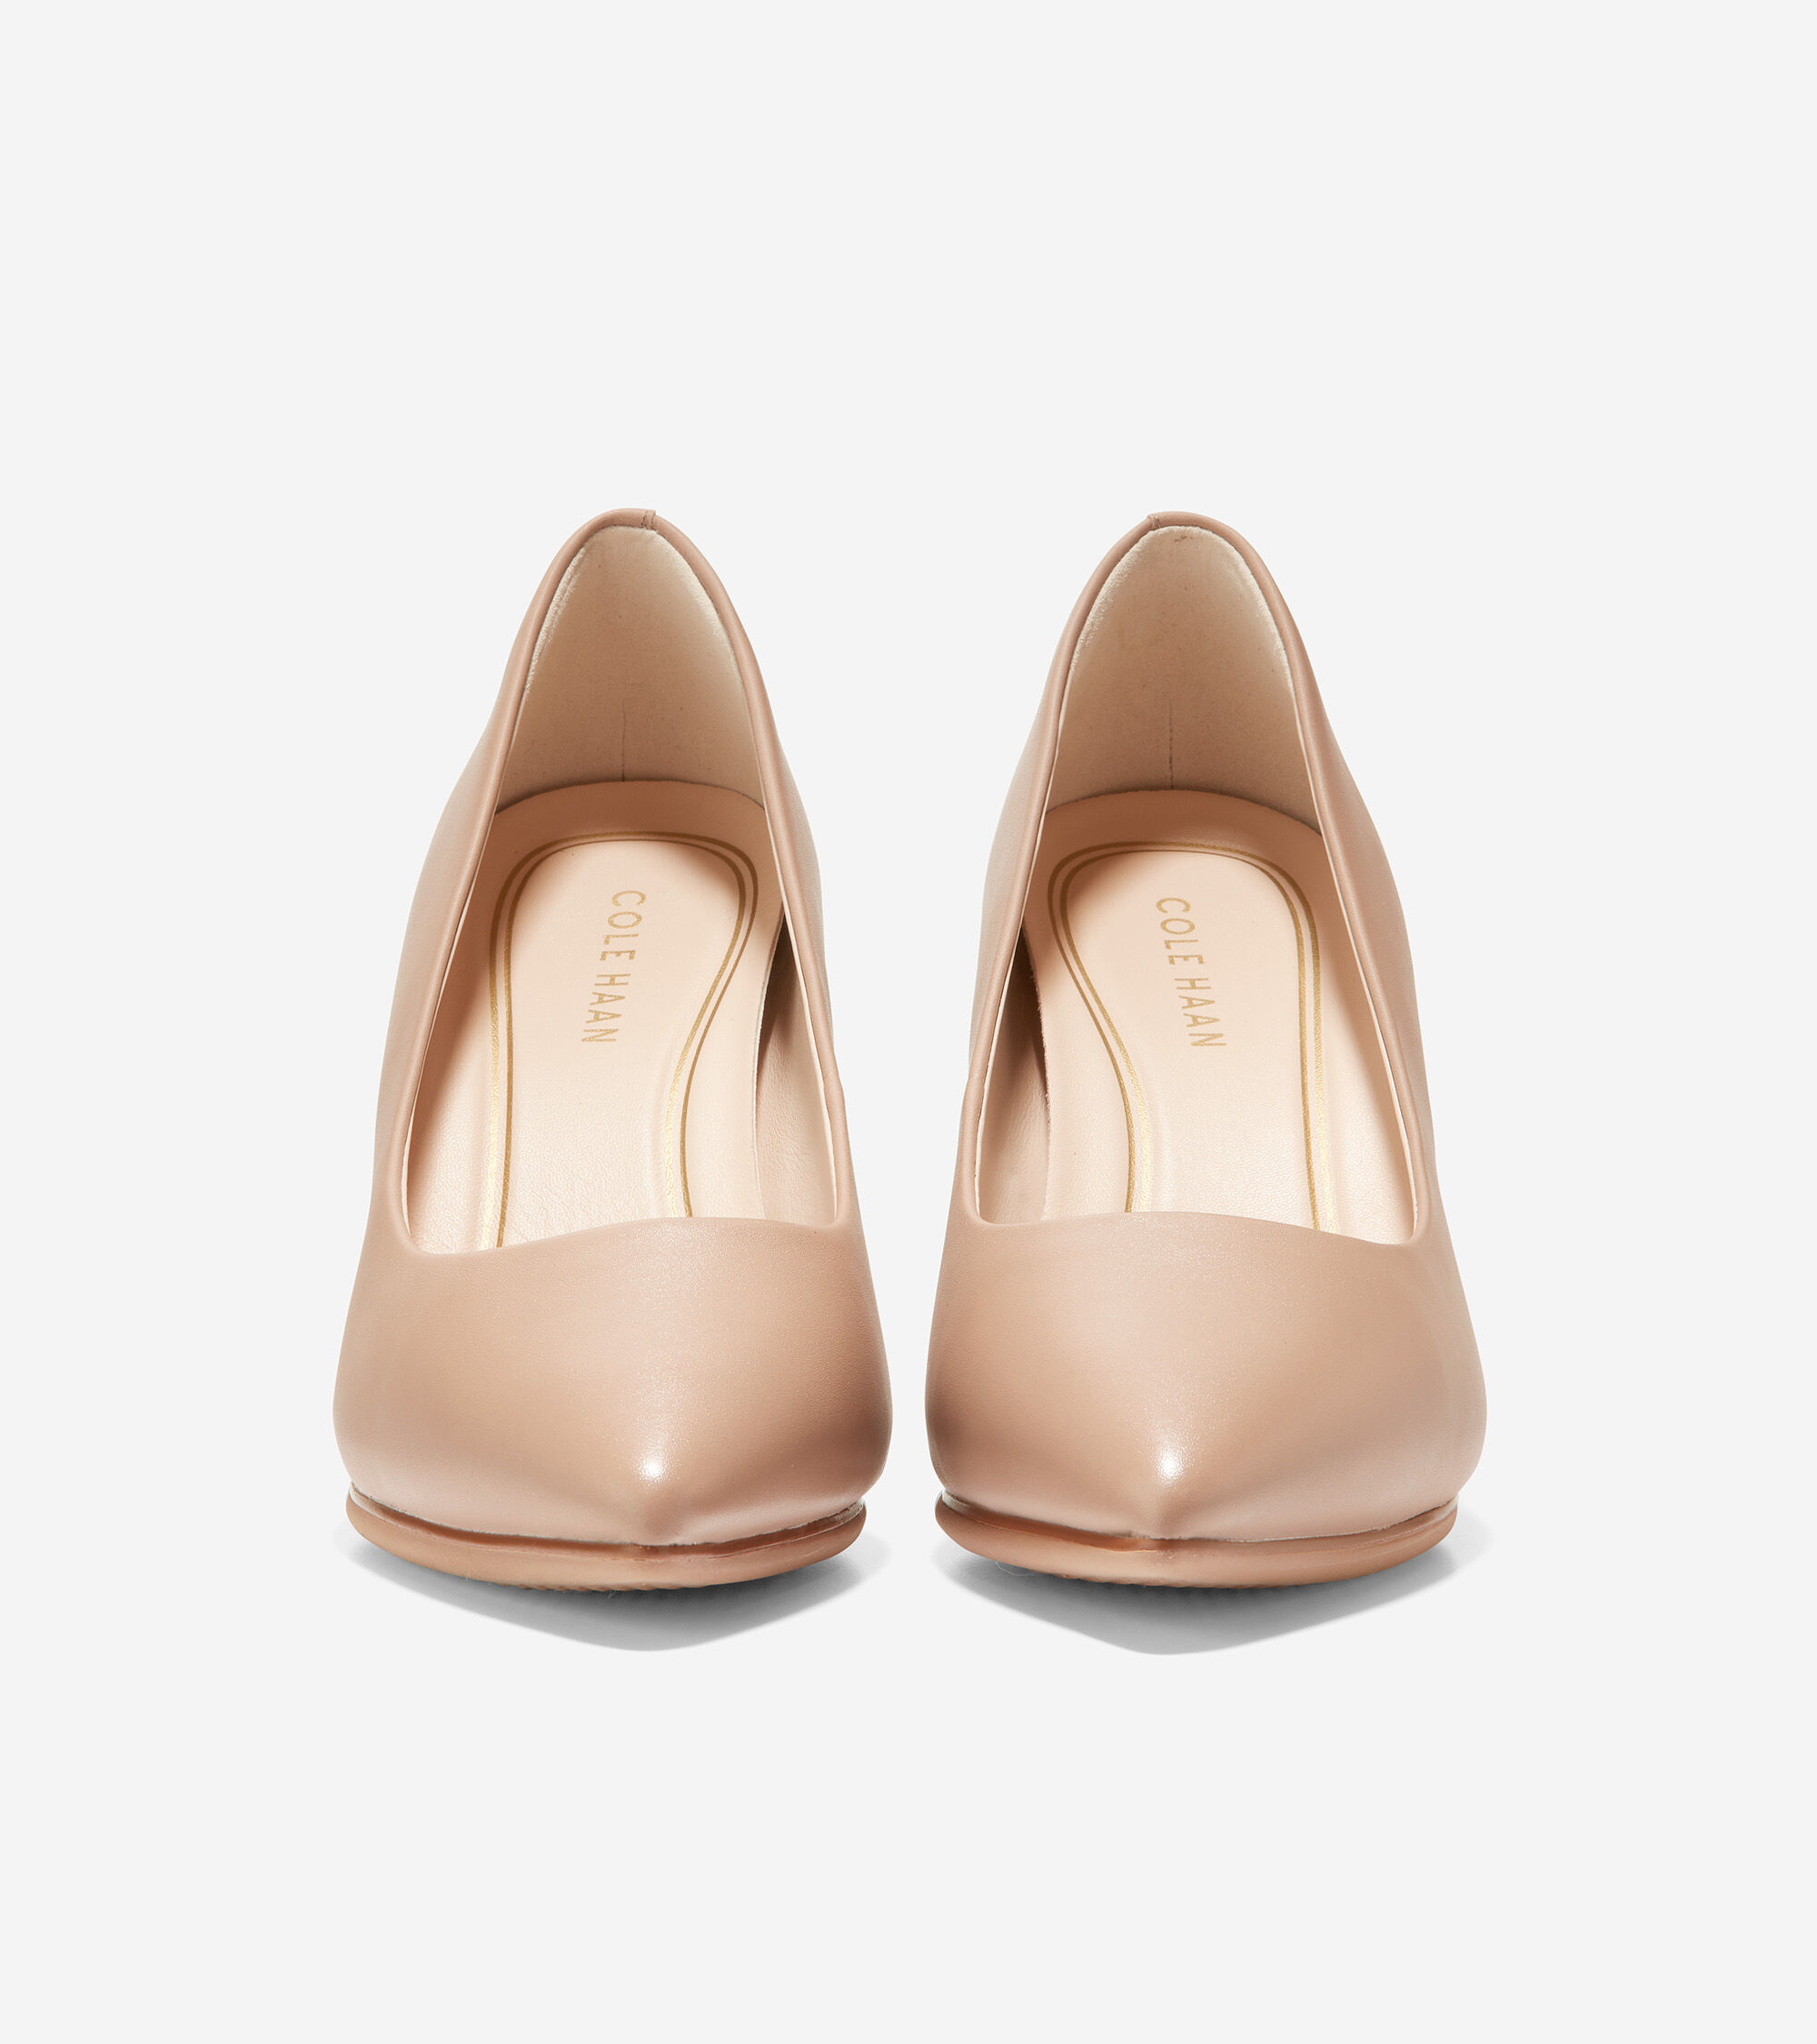 Women's Grand Ambition Pump in Amphora Leather | Cole Haan